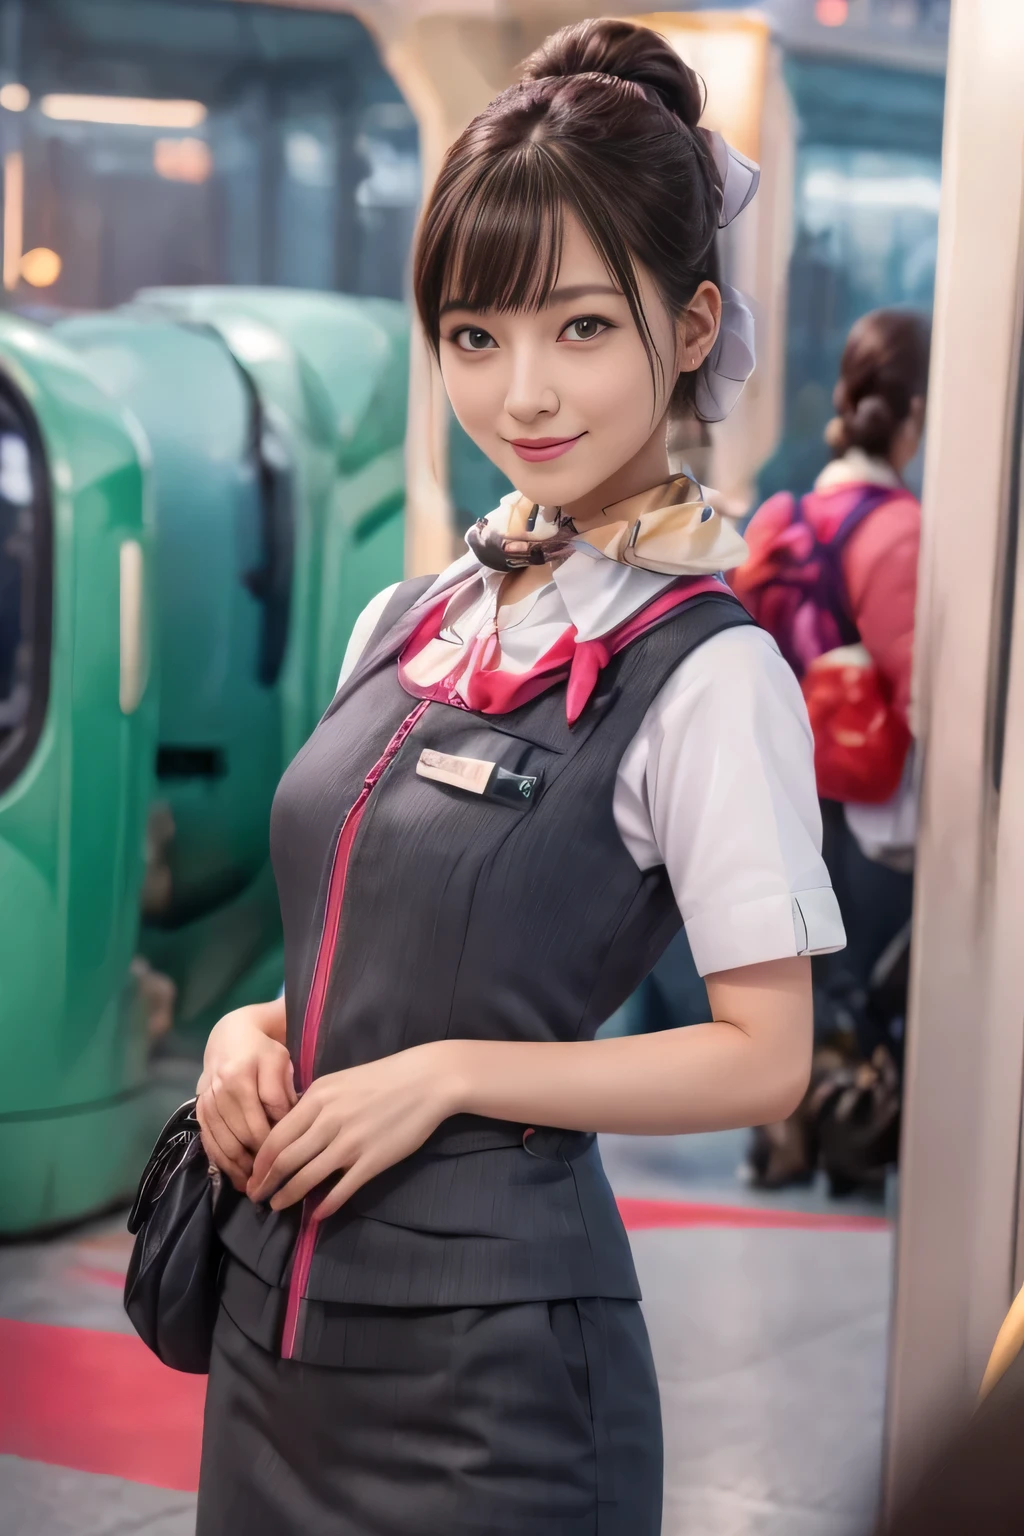 (masterpiece:1.2, Highest quality:1.2), 32k HDR, High resolution, (alone、One girl)、（At the station platform、Professional Lighting）、Empty train station platform background、（Realistic style of JR Gran Class crew uniform）、Short sleeve blouse、a scarf around the neck、（JR Gran Class flight attendant uniform with pink parts on the skirt sleeves）、（The uniform of a flight attendant in JR Gran Class has a pink line on the front zipper of the vest.）、Dark brown hair、（Chignon、Hair tied up）、Dark brown hair、Long Shot、Big Breasts、（（Great hands：2.0）），（（Harmonious body proportions：1.5）），（（Normal limbs：2.0）），（（Normal finger：2.0）），（（Delicate eyes：2.0）），（（Normal eyes：2.0））)、Big Breasts、Luxury Necklace、smile、Beautiful standing posture,Place your hands around your stomach